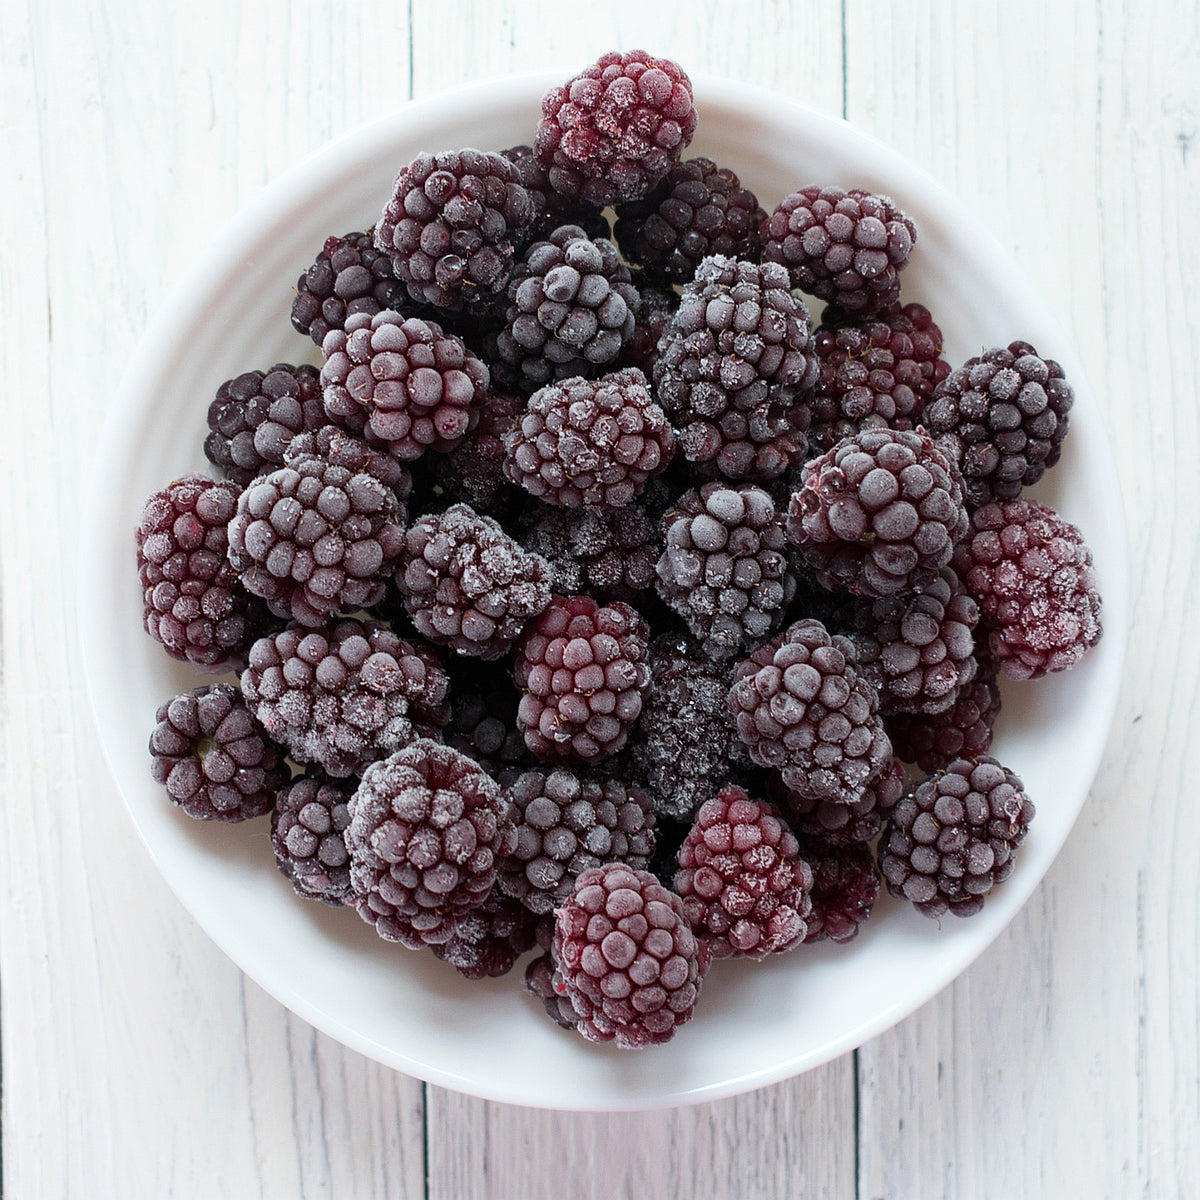 All-Natural Frozen Blackberries from Chile (1kg) - Horizon Farms